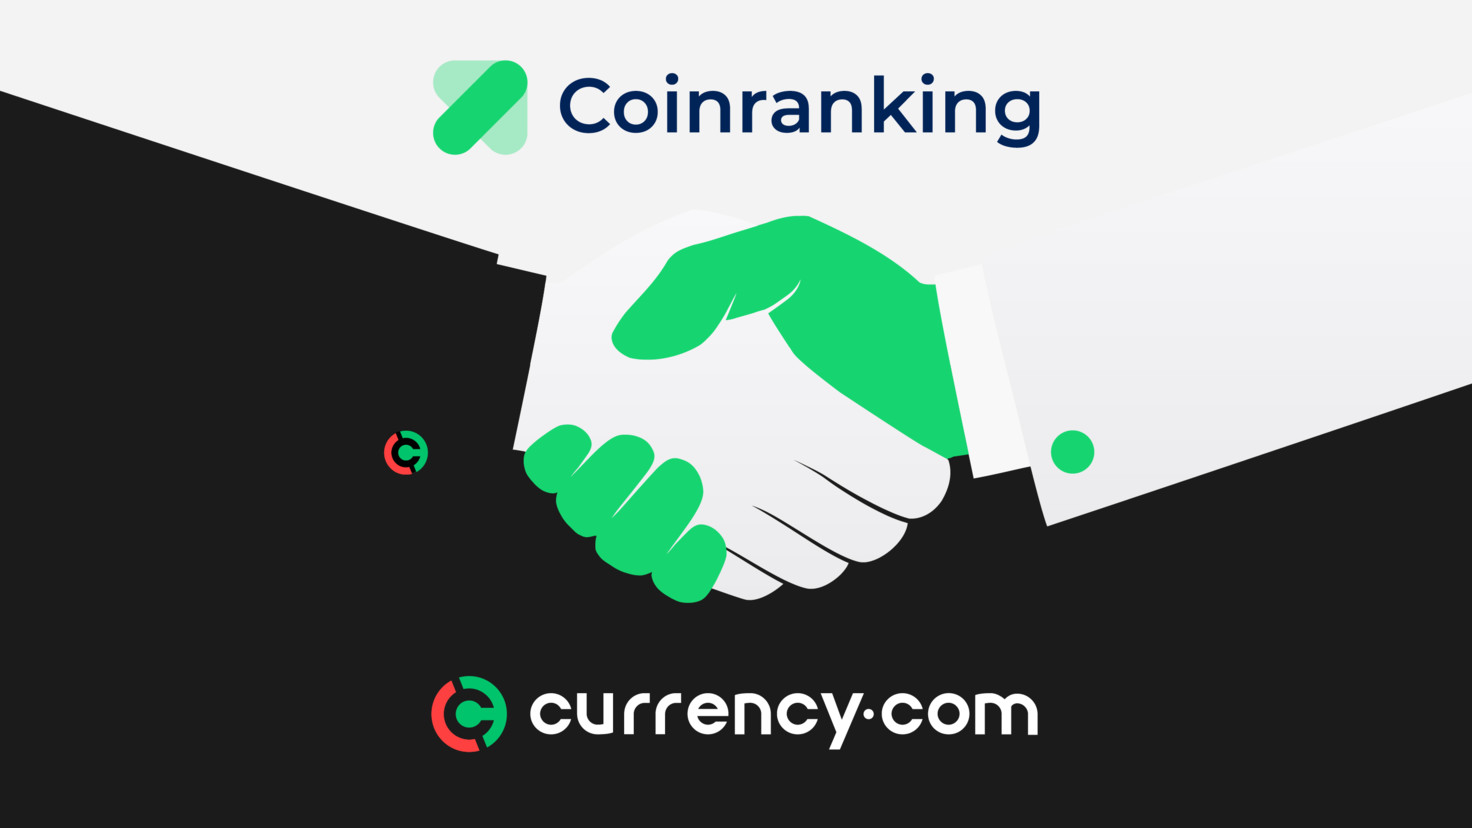 Currency.com announces partnership with Coinranking